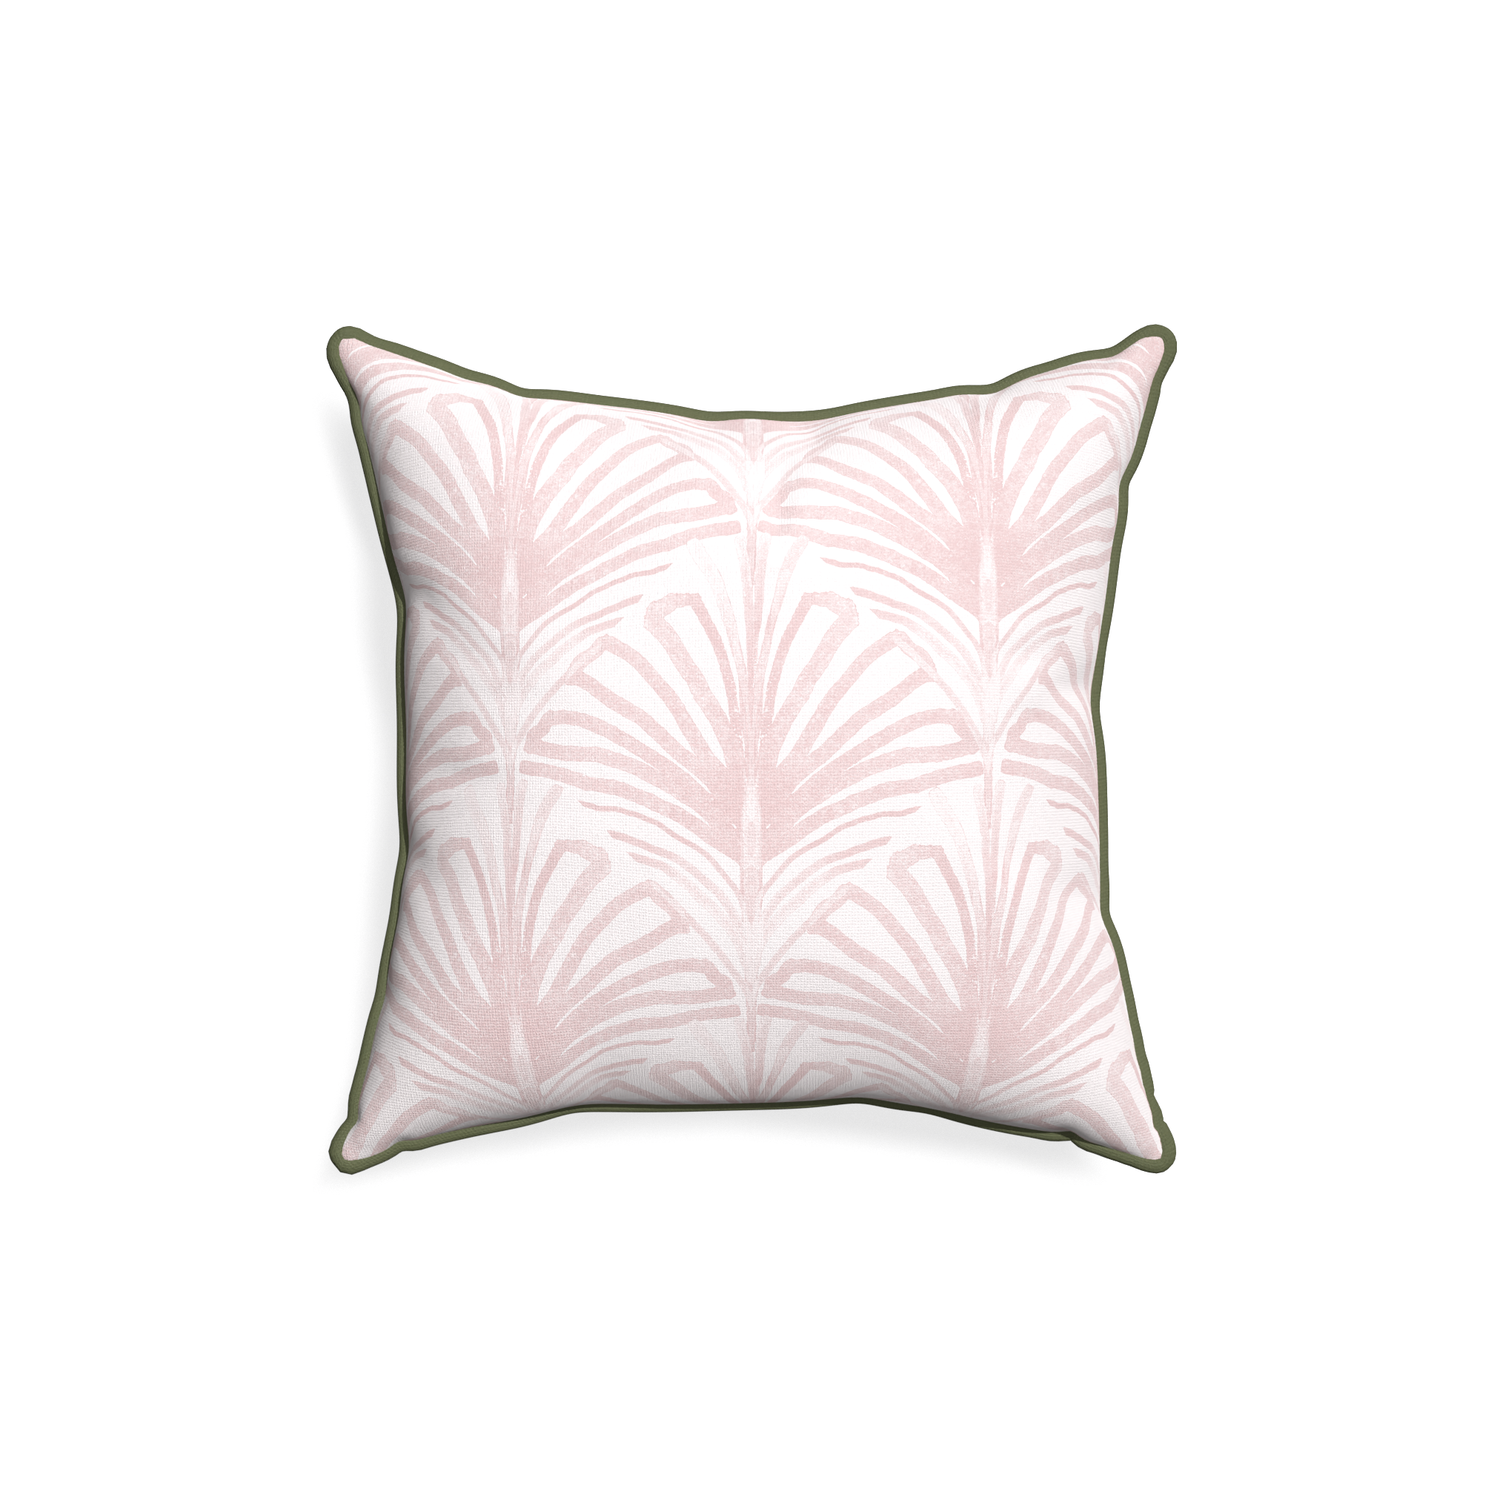 18-square suzy rose custom pillow with f piping on white background